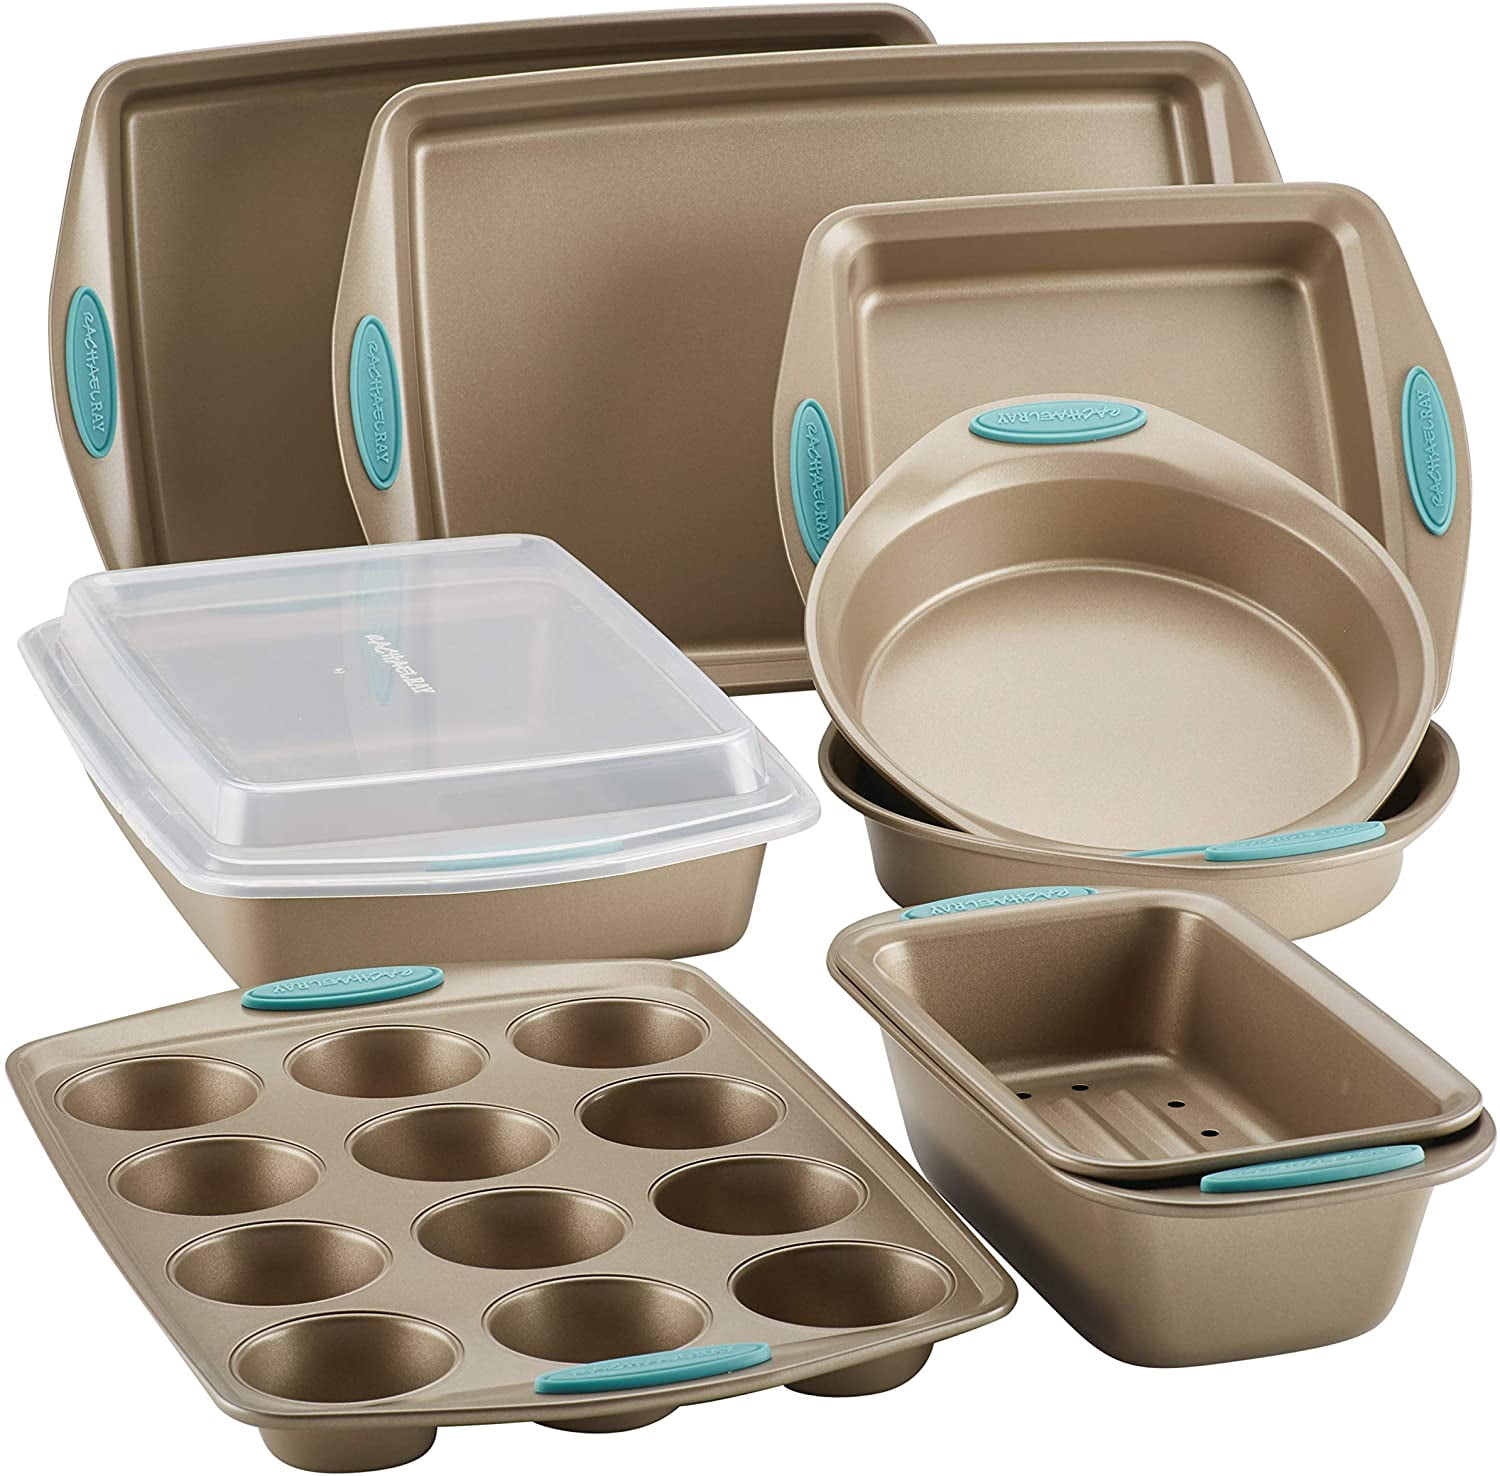 5 Piece 1 Baking Pans and Cake Pans Nonstick Bakeware Set with Grips Includes Nonstick Bread Pan Gray with Orange Grips